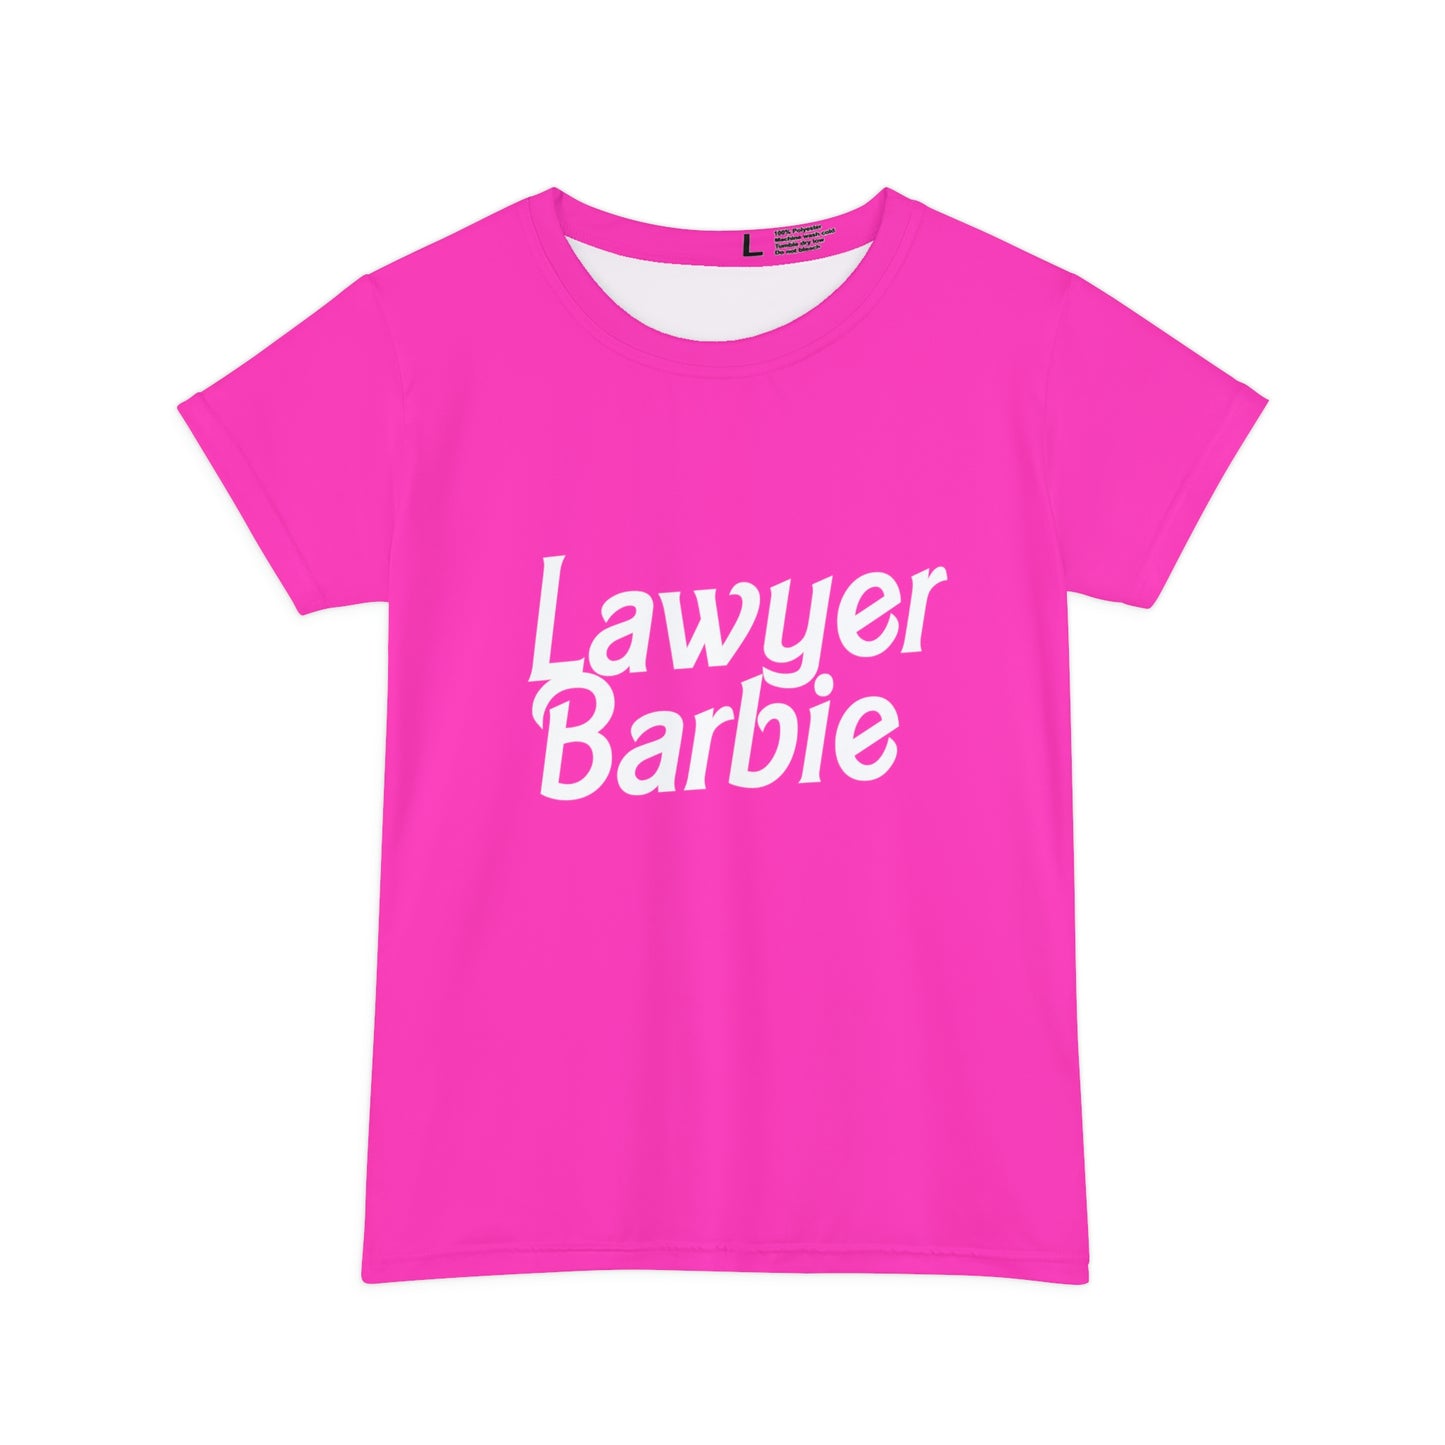 Lawyer Barbie, Bachelorette Party Shirts, Bridesmaid Gifts, Here comes the Party Tees, Group Party Favor Shirts, Bridal Party Shirt for women